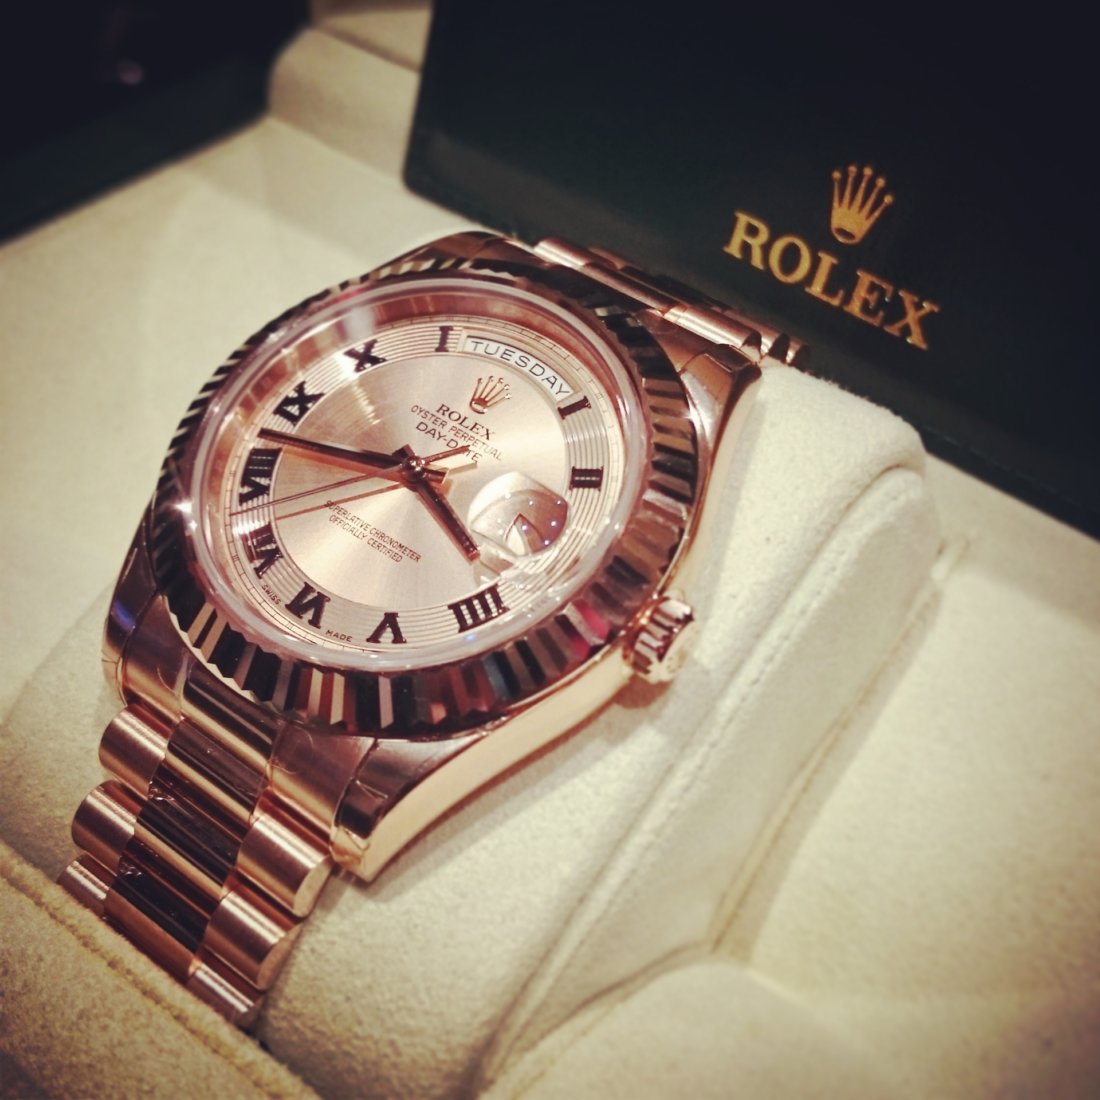 Own a Rolex? Get it appraised and 